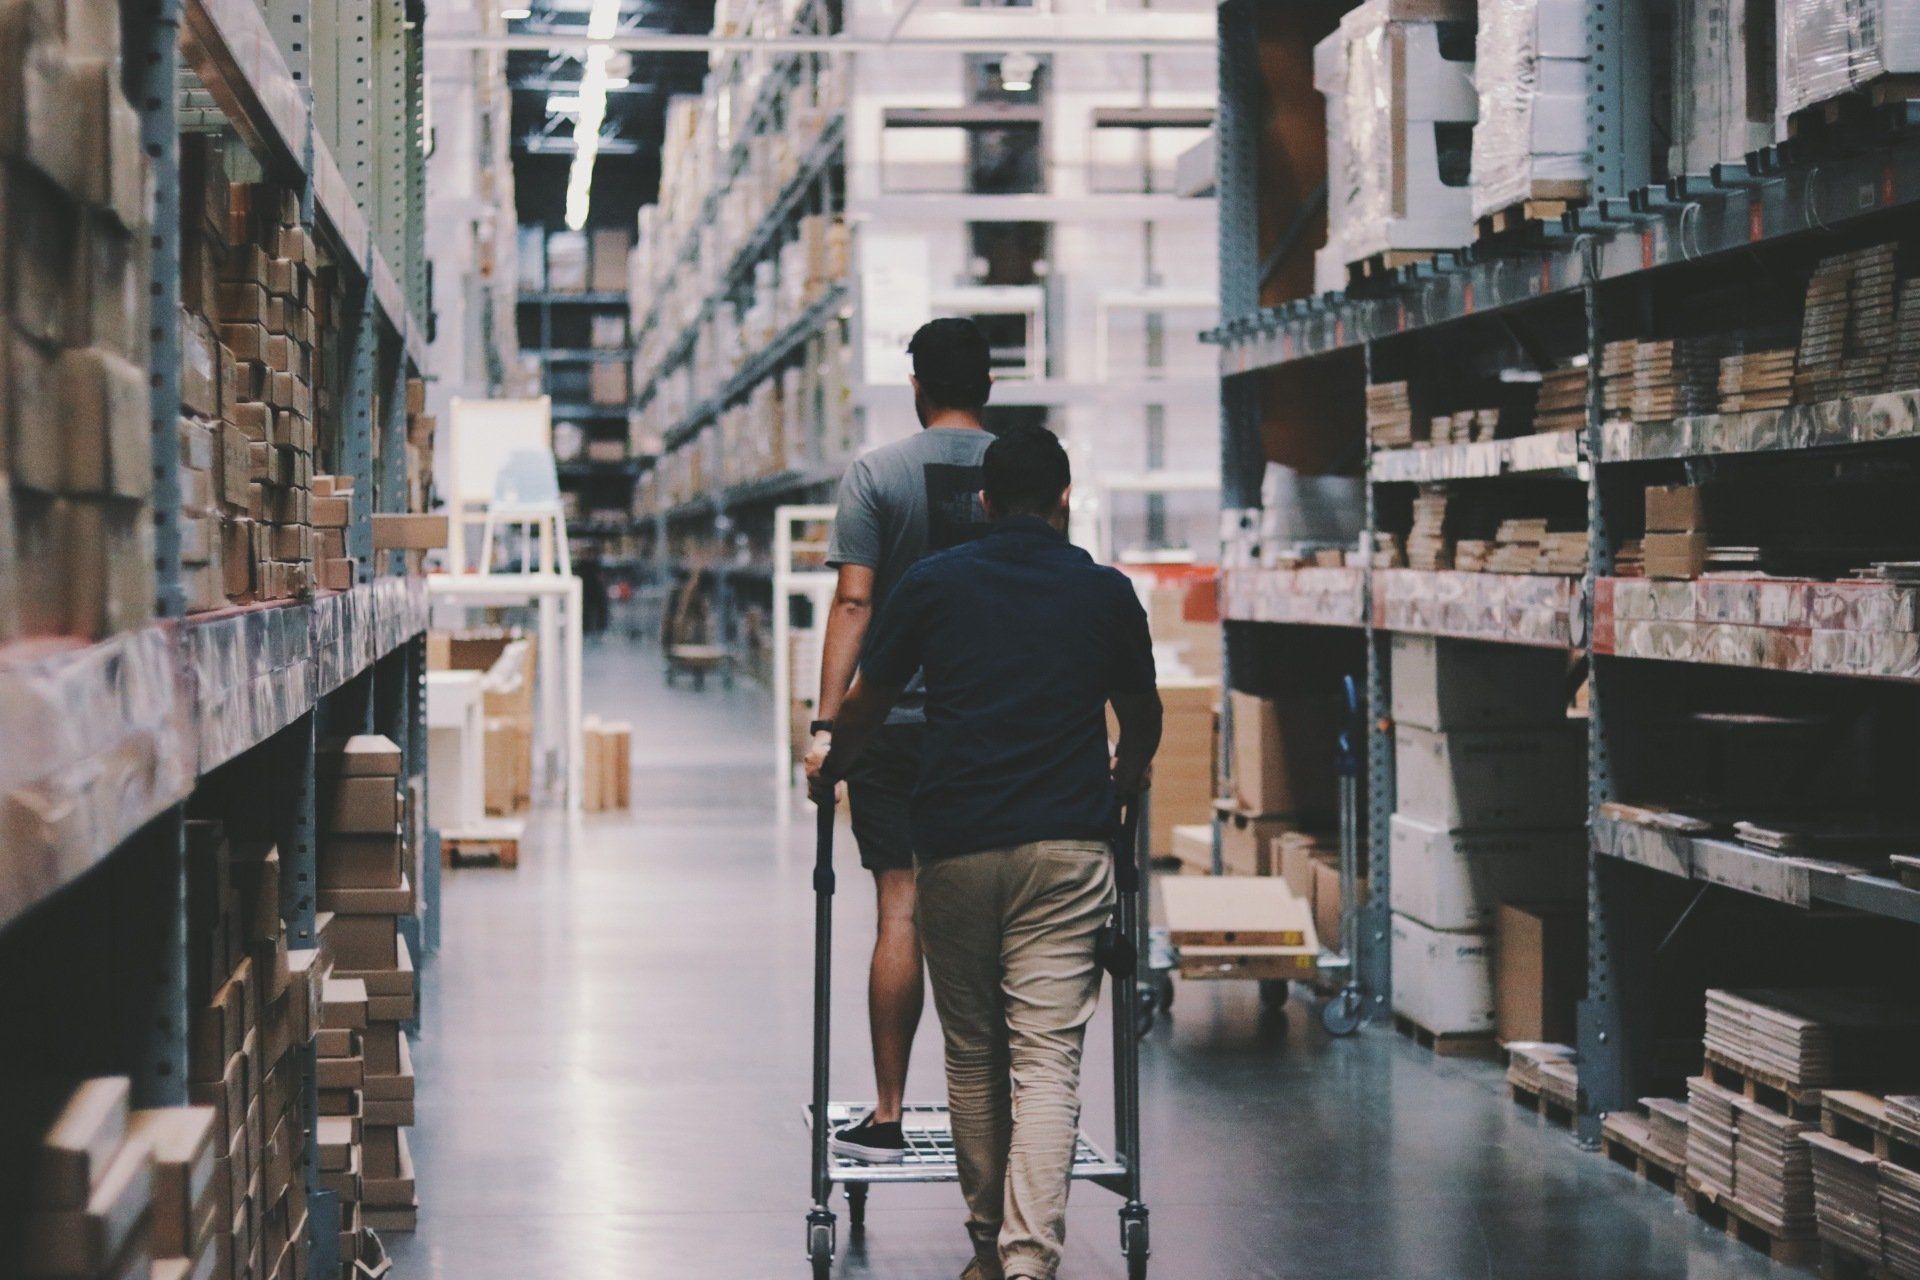 This is an image of two warehouse workers walking through tall shelves in a warehouse.